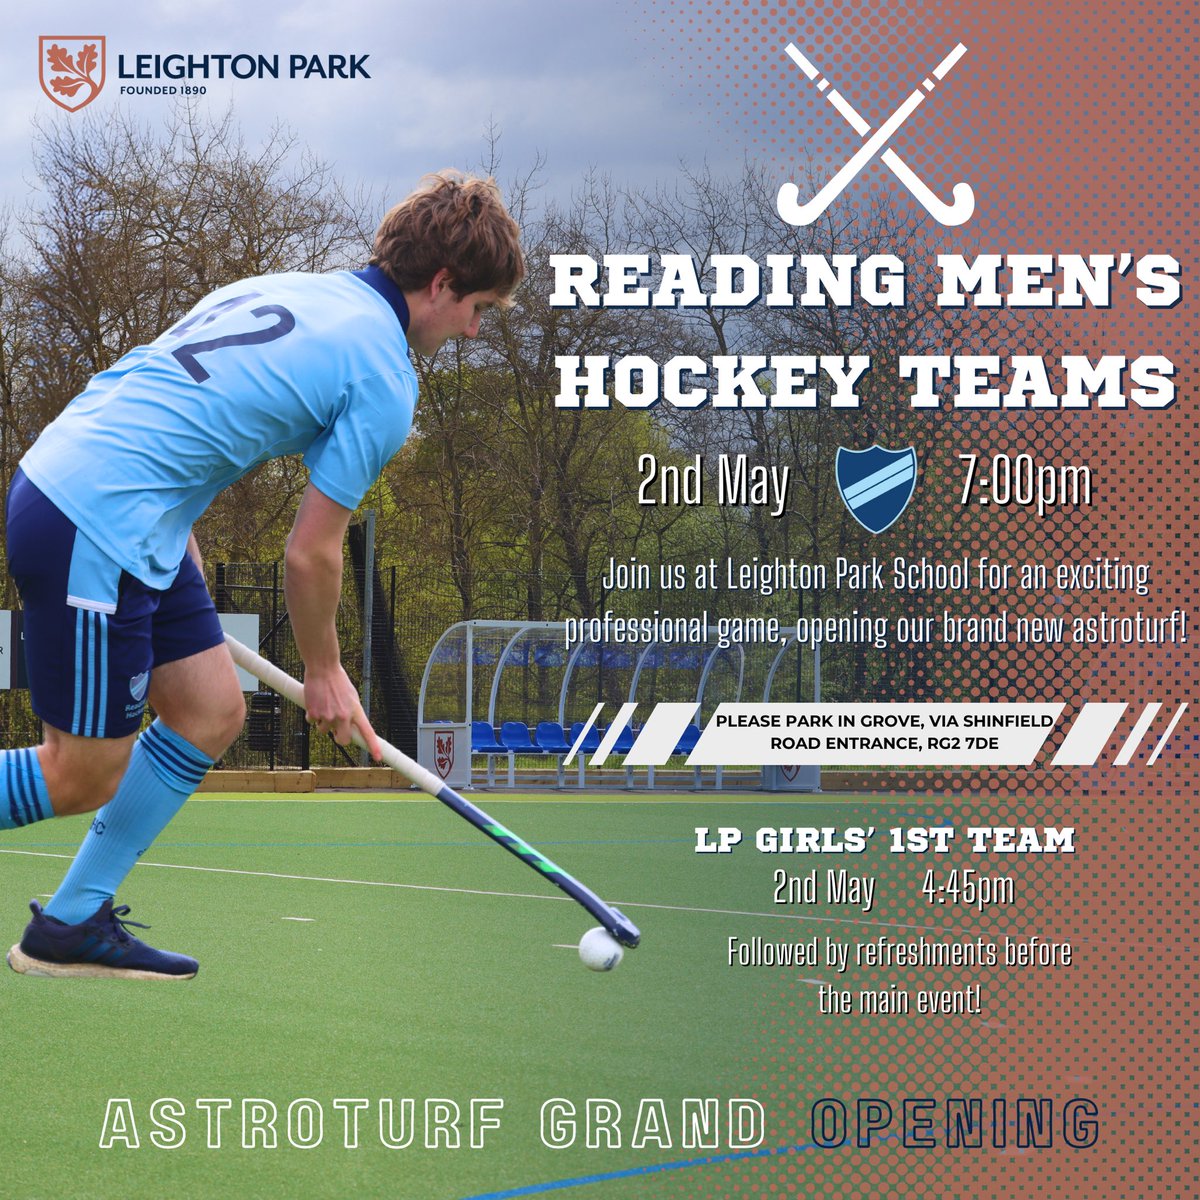 Next Thursday we have @SMcCallin opening our new Astro! 🏑4:45 pm our girls 1st team are taking on @ReddamSportUK 🏑 7pm @readinghc Mens Performance Squad are holding an exhibition game! Come along to show your support for both teams! Refreshments will be served! 🍬🍭🥤